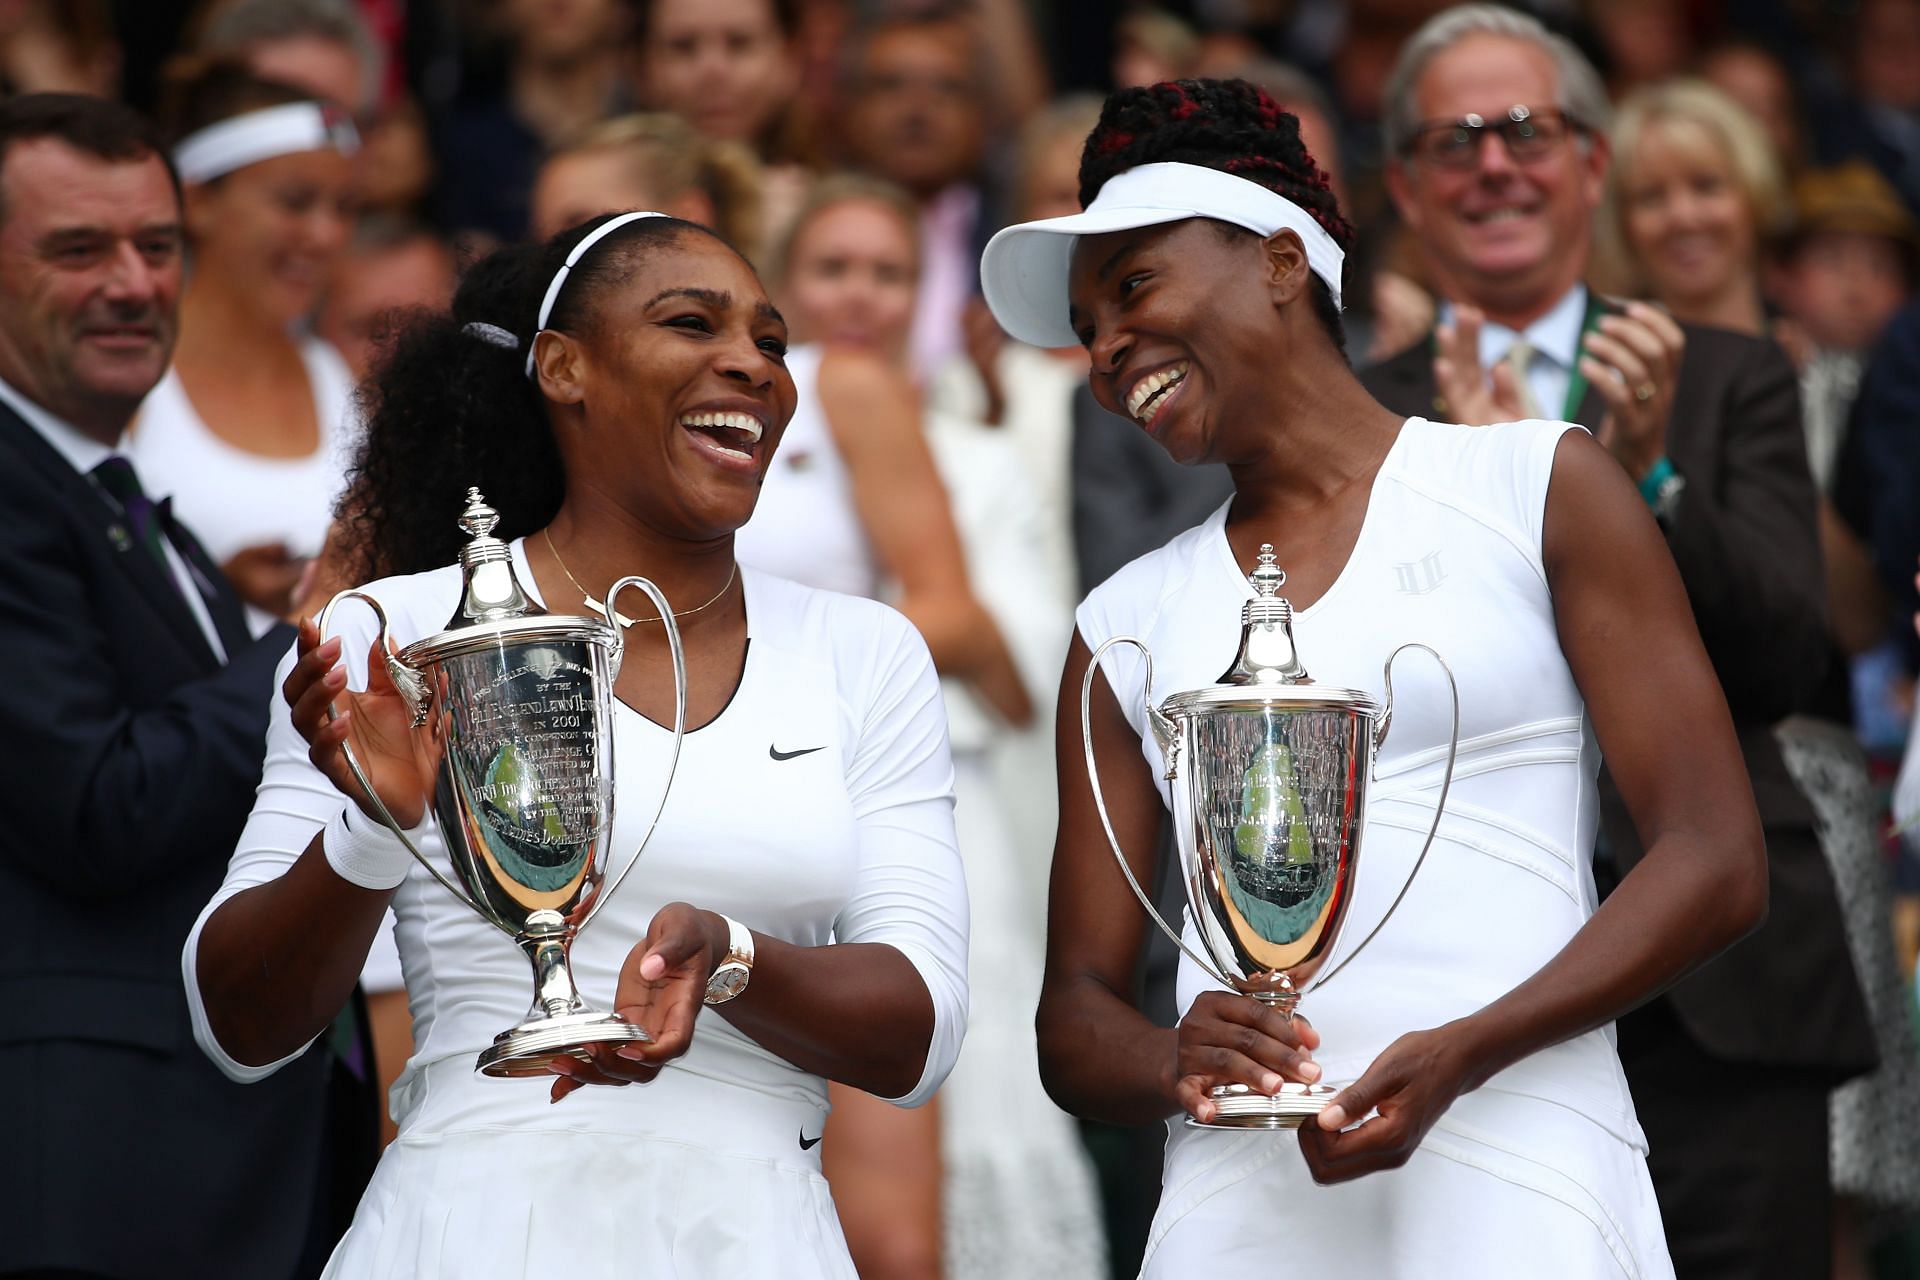 The Williams Sisters at the 2016 Wimbledon Championships